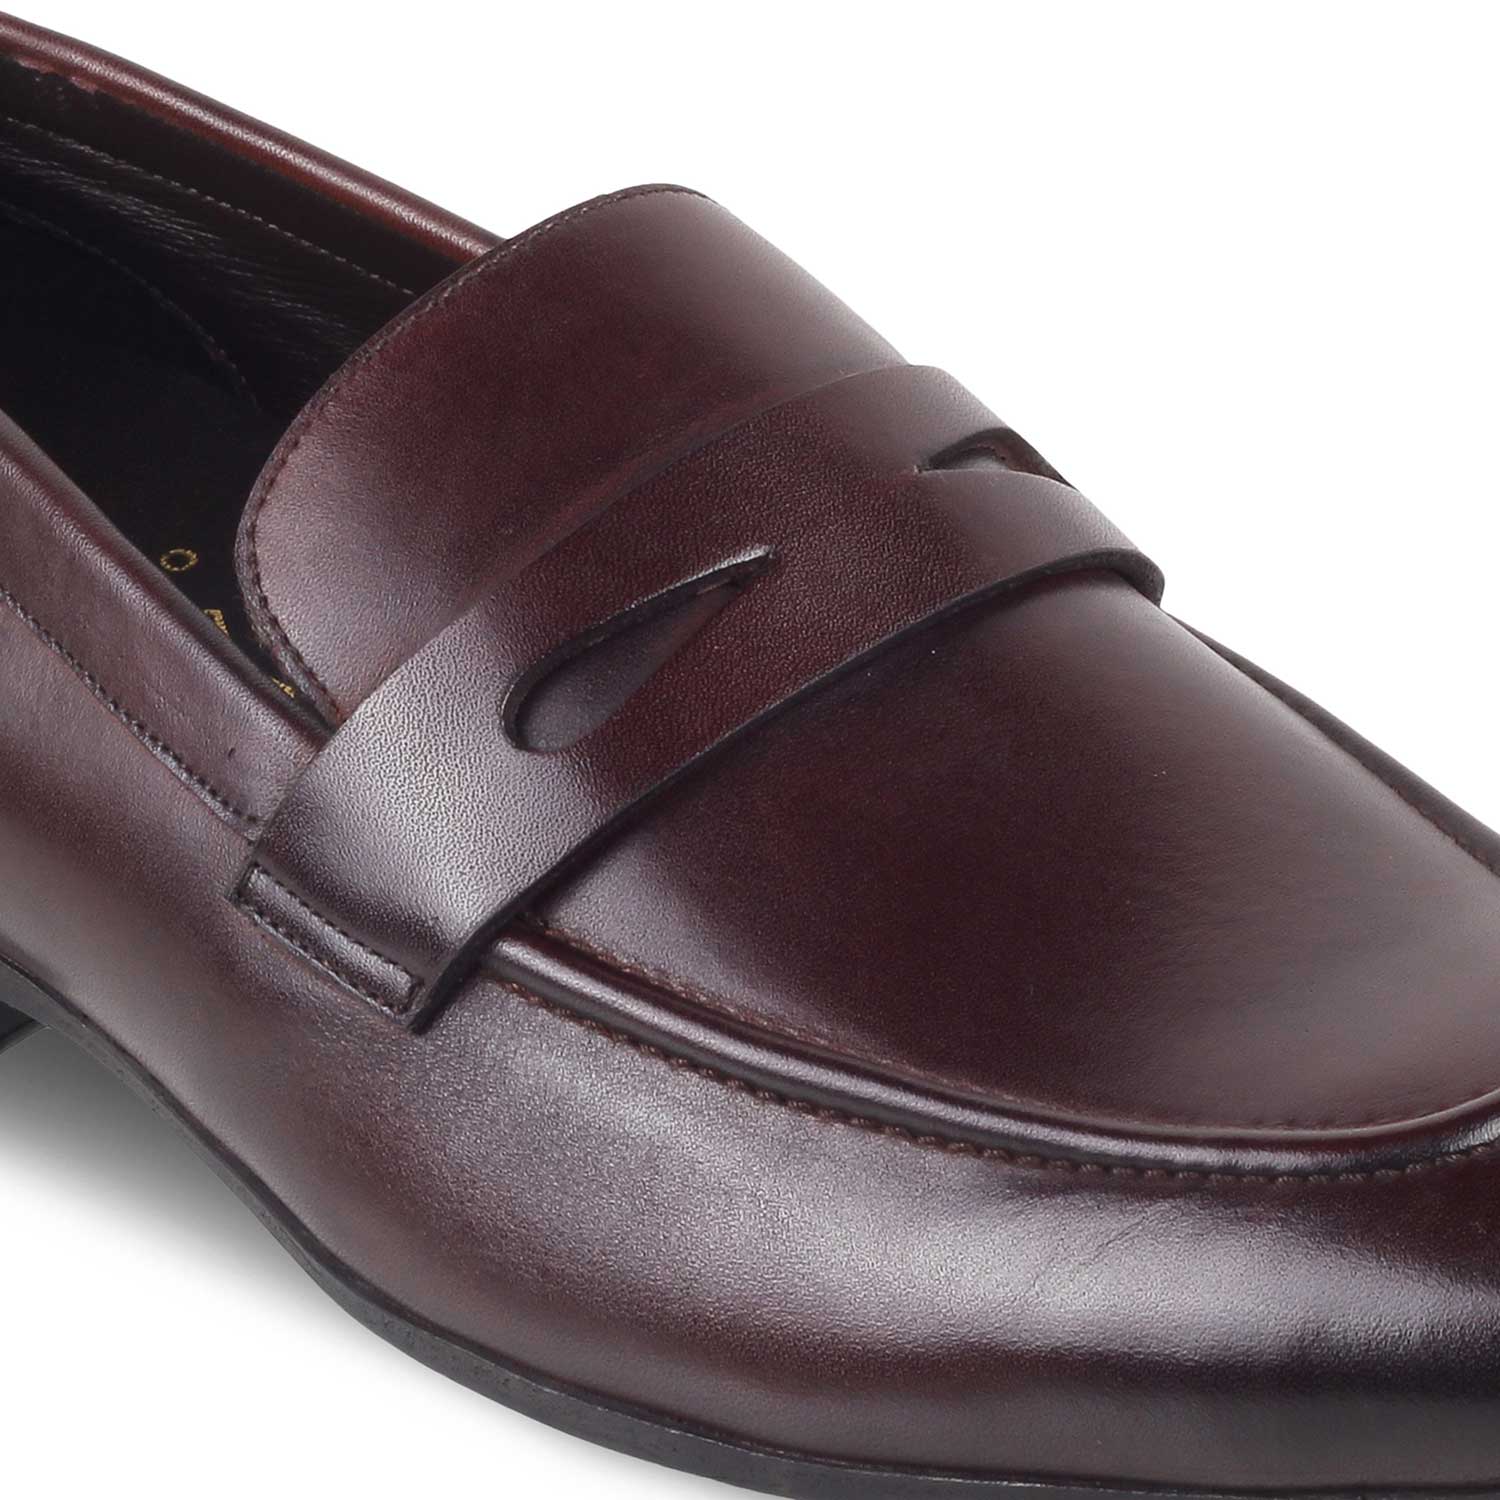 Apenny Brown Men's Leather Penny Loafers Online at Tresmode.com